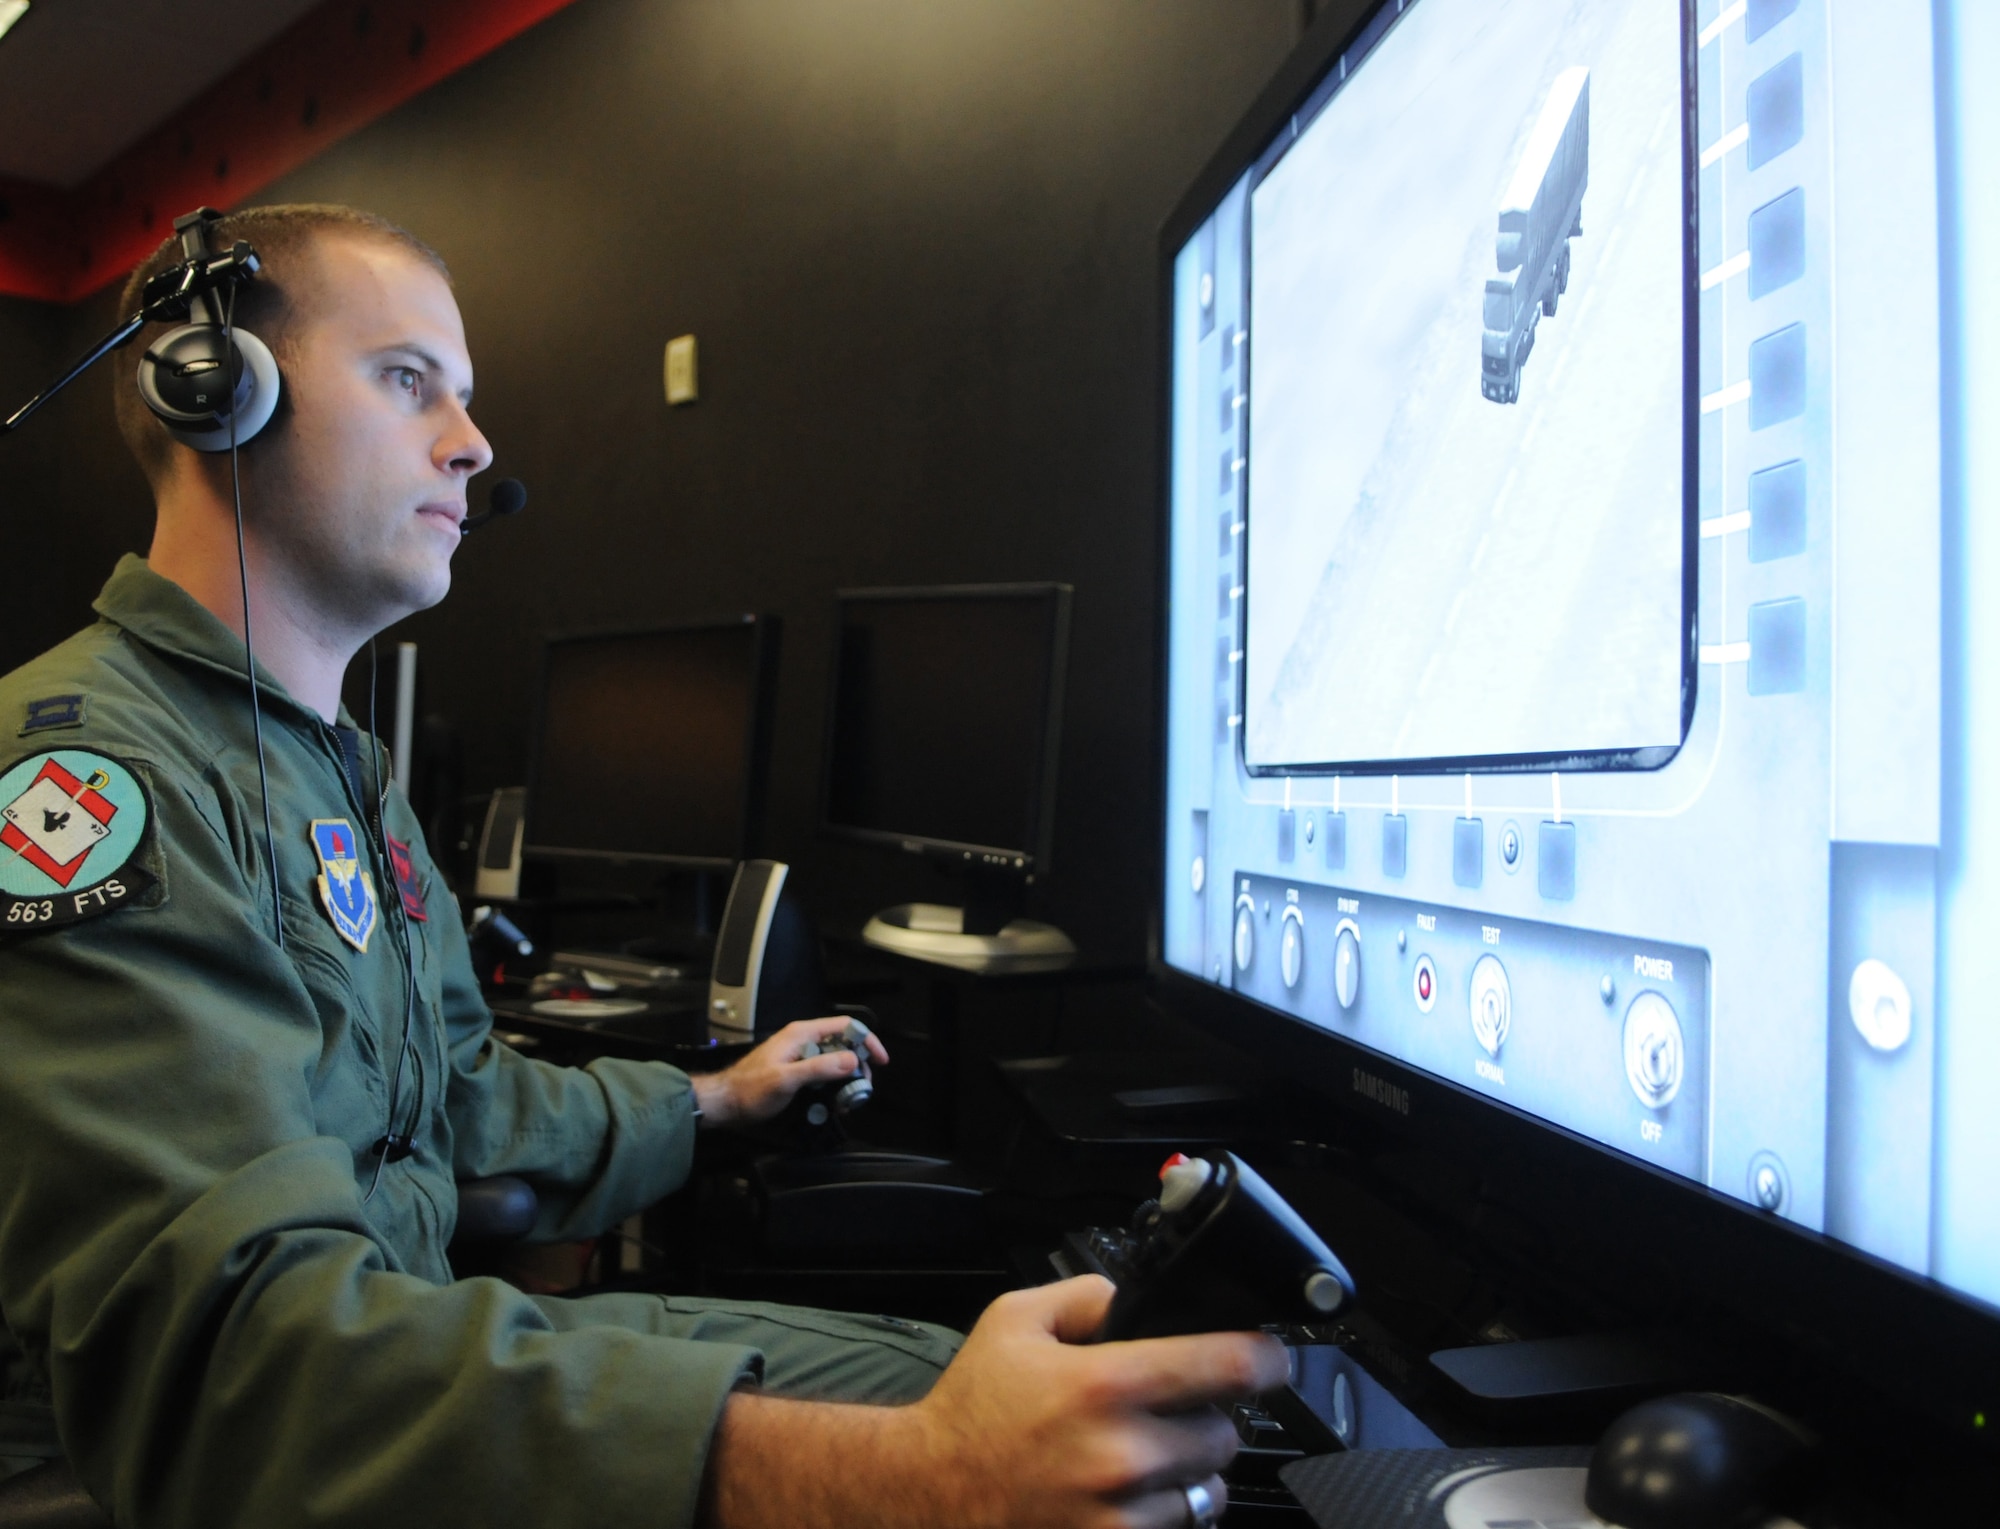 Capt. Sam Allen, 563rd Flying Training Squadron instructor and Unmanned Aircraft Systems Fundamentals Course director at Randolph Air Force Base, Texas, operates the controls of a battlespace simulator in the course's laboratory.  (U.S. Air Force photo/Rich McFadden) 